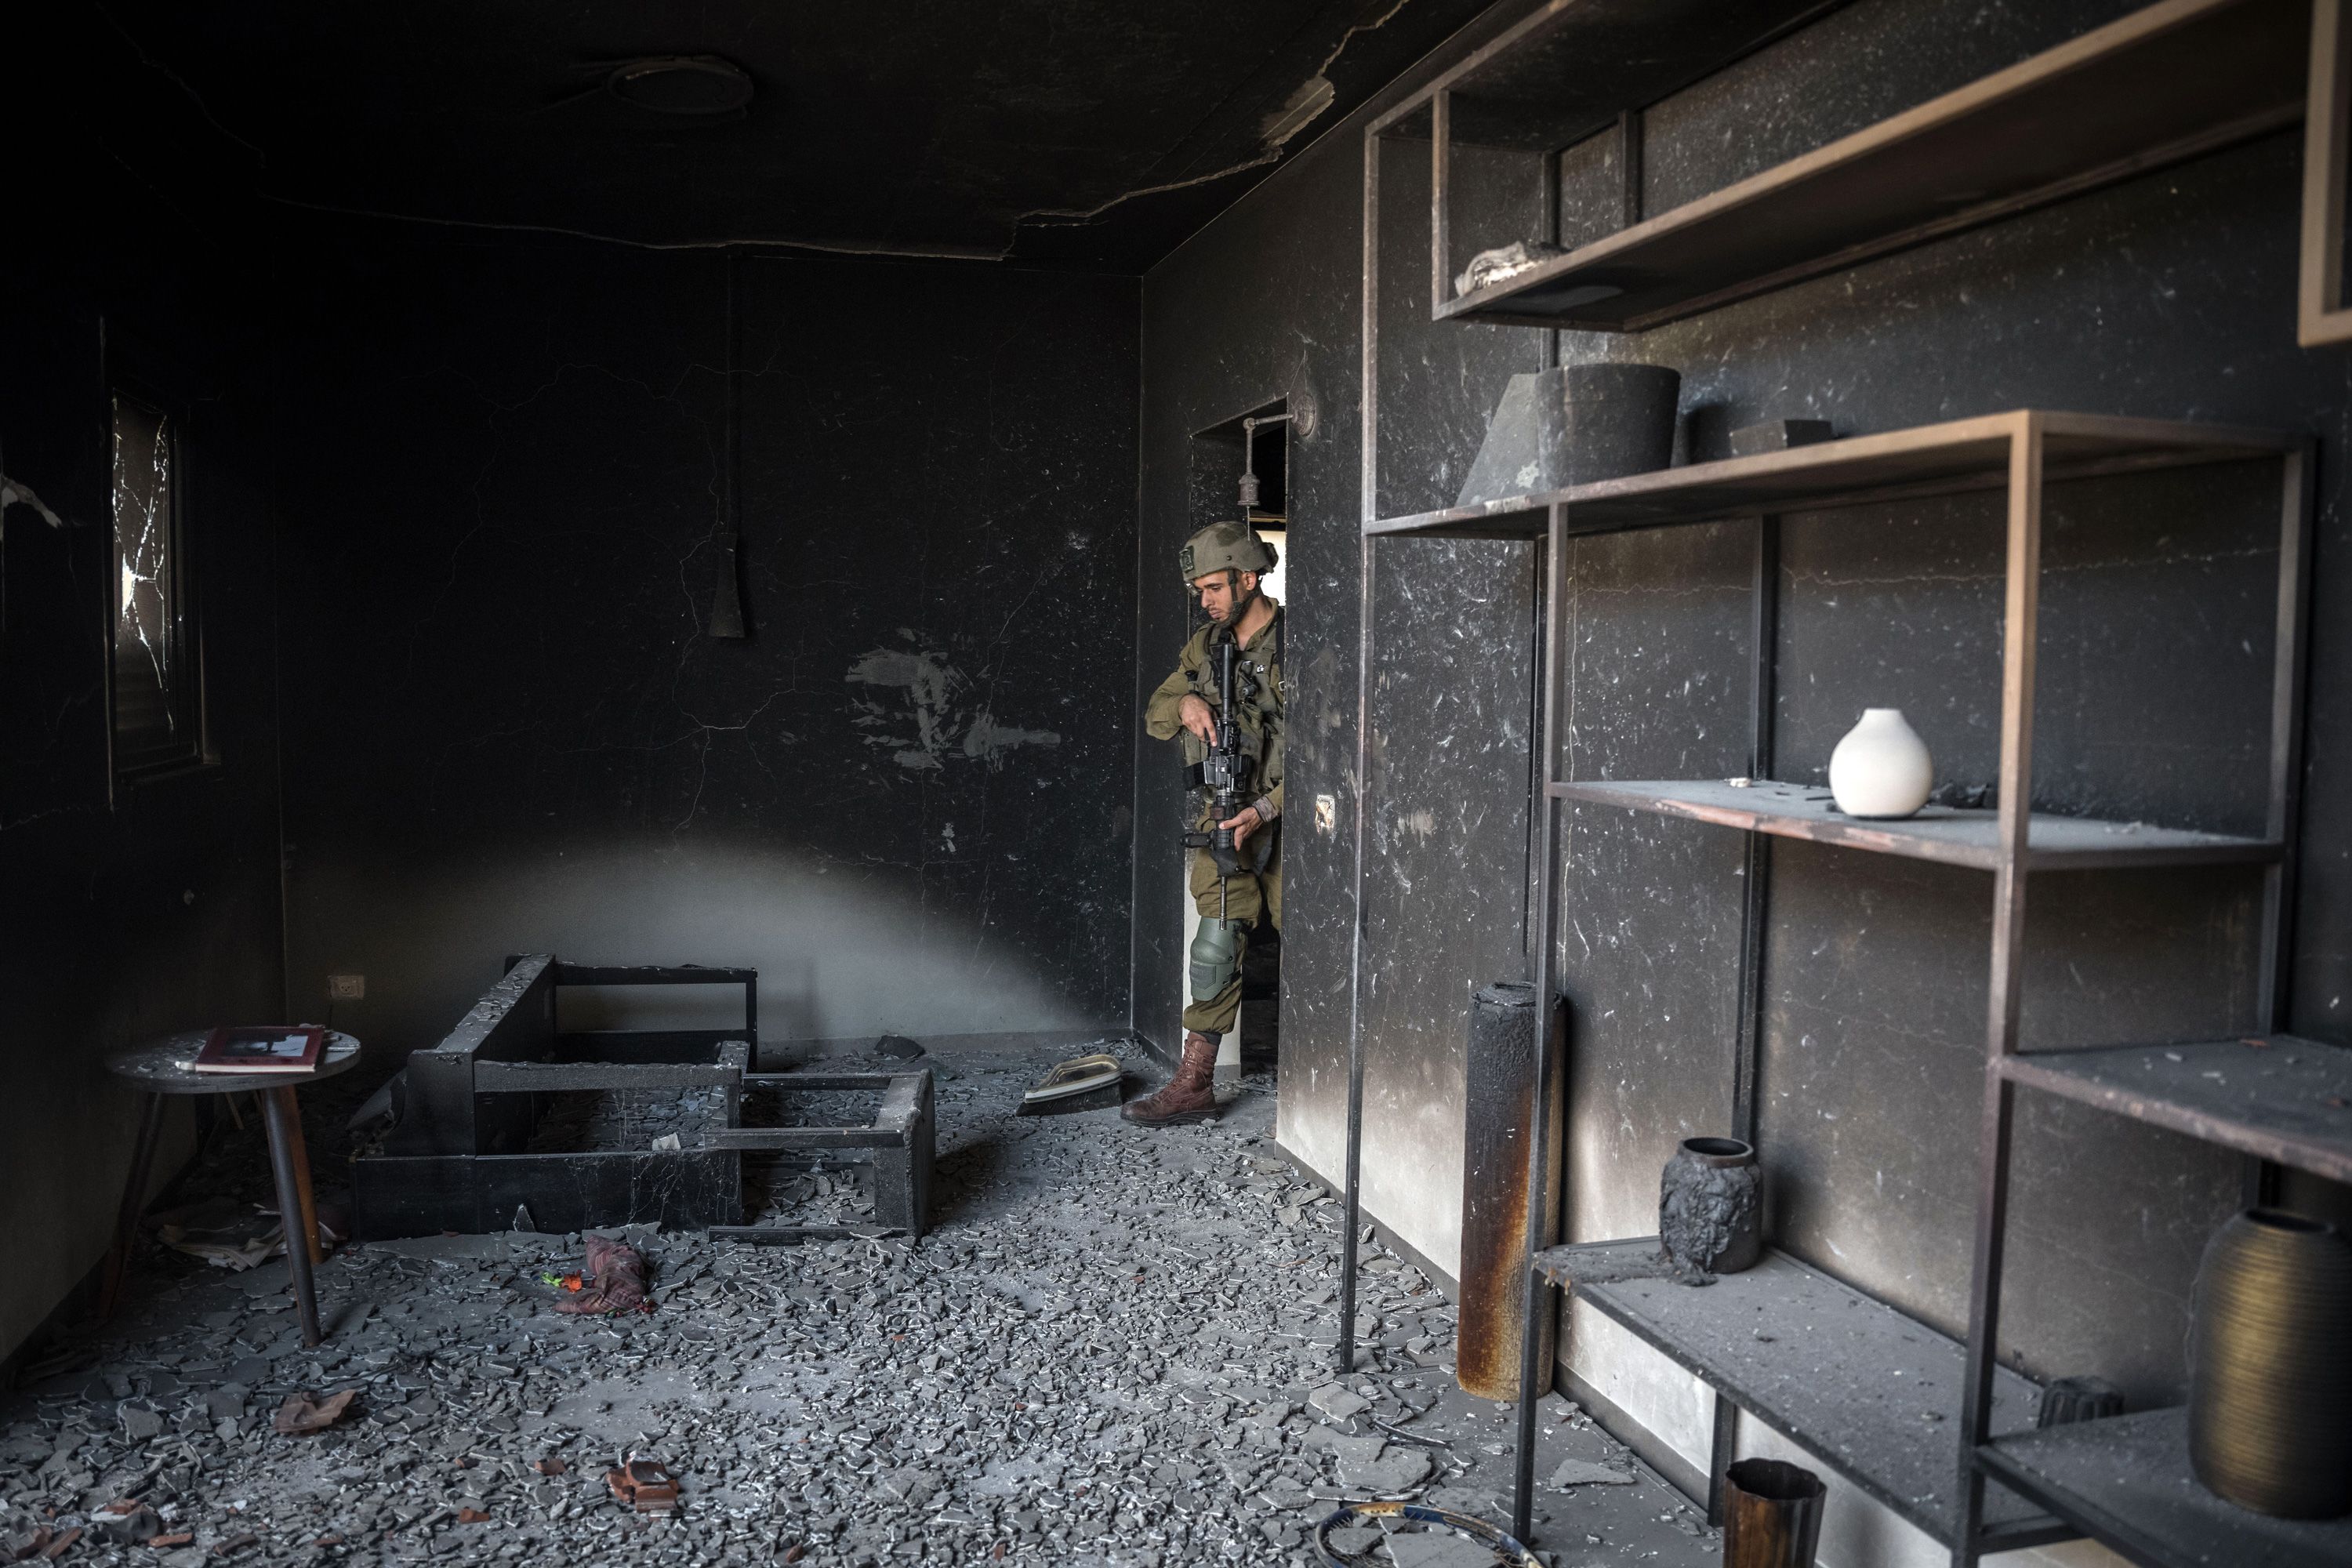 An Israeli soldier looks inside a house that was overrun by Hamas militants in Be'eri, Israel, on October 13.